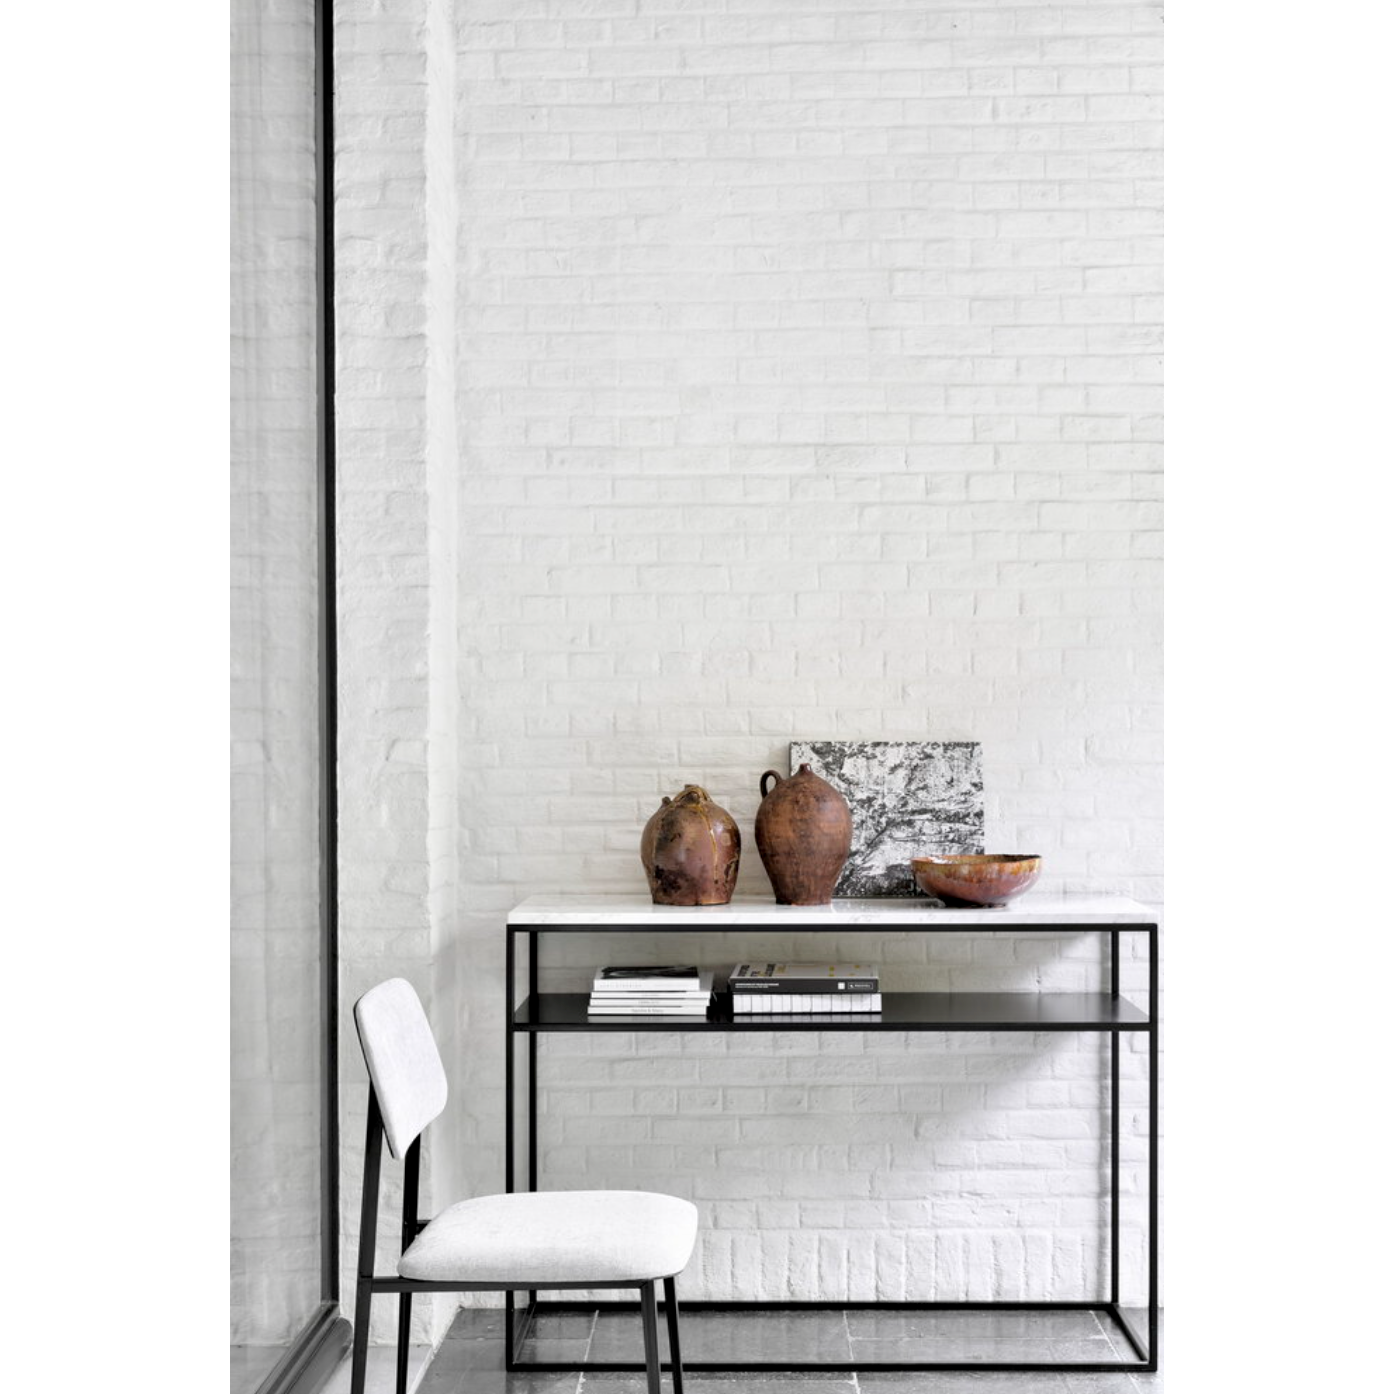 We love that the Stone console is an even mix of contemporary and glamorous elements bringing a touch of chic style to your entry way or living room. With its modern open metal frame and its pristine marble, we admire the simple lines and sleek design by designer, Djordje Cukanovic.  Dimensions: 47.5"w x 16"d x 34"h  Weight: 91 lbs  Material: Marble top, black metal frame